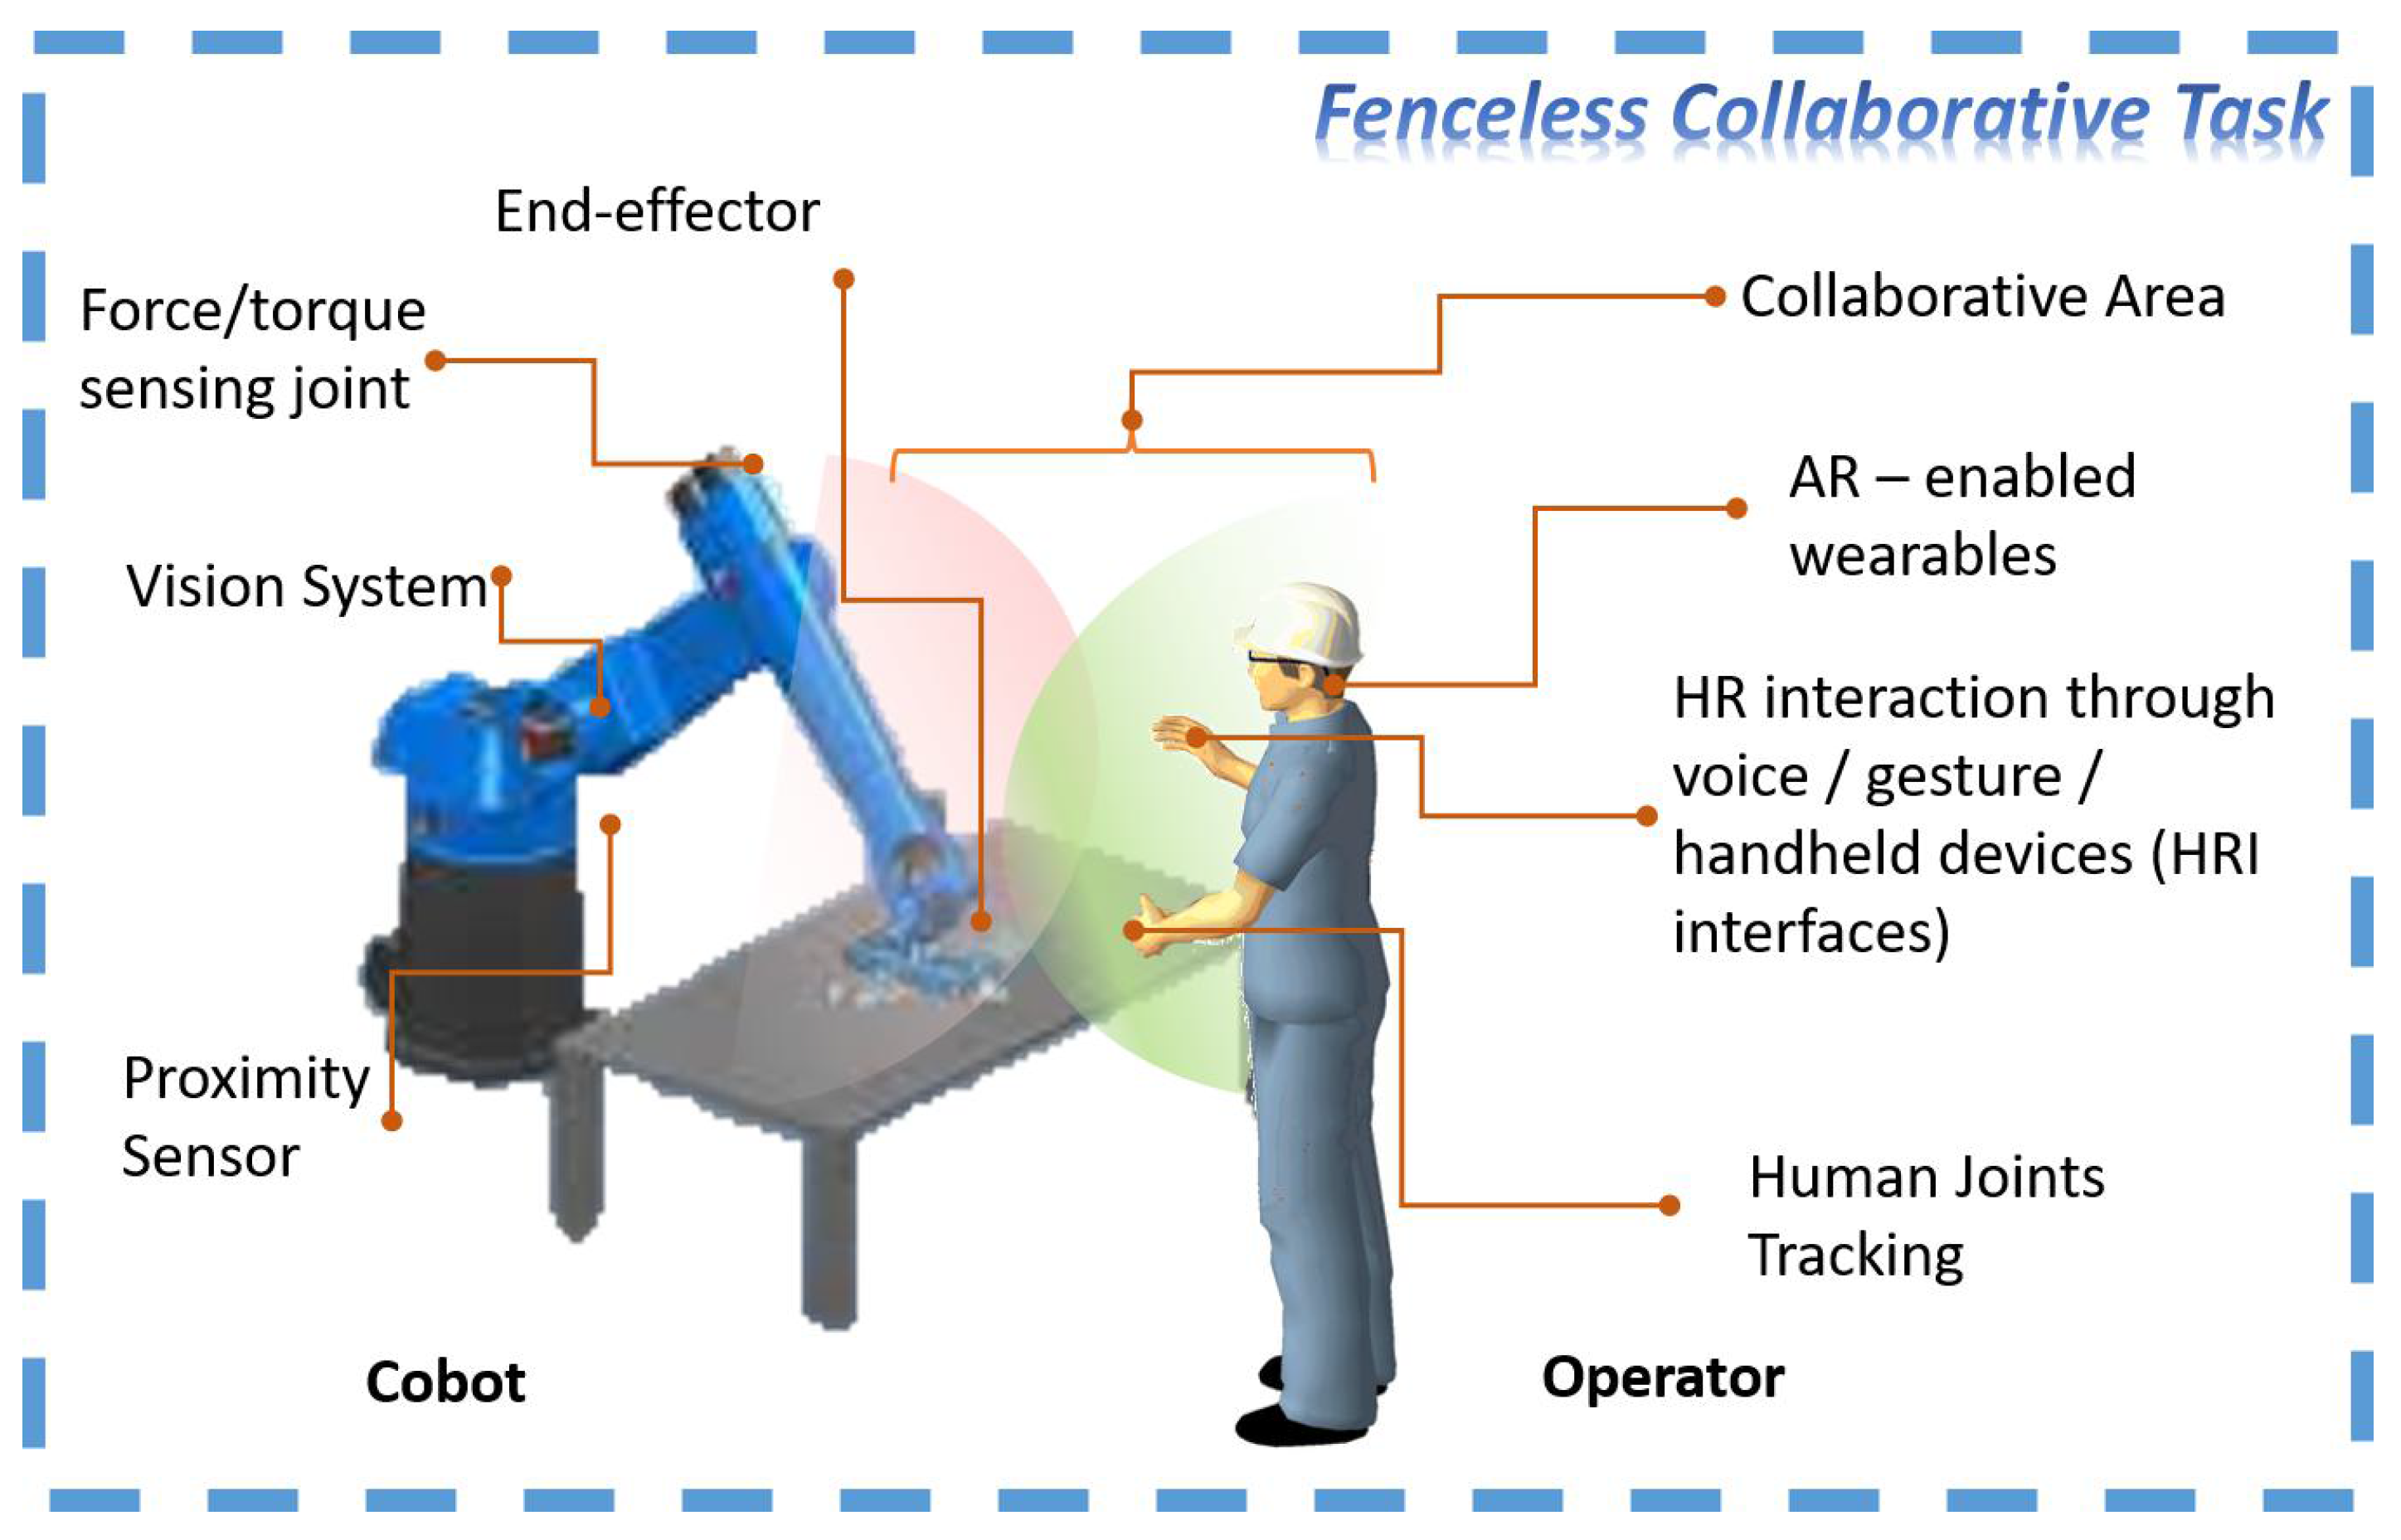 Applied Sciences | Free Full-Text | Decision Making with STPA through Markov  Decision Process, a Theoretic Framework for Safe Human-Robot Collaboration